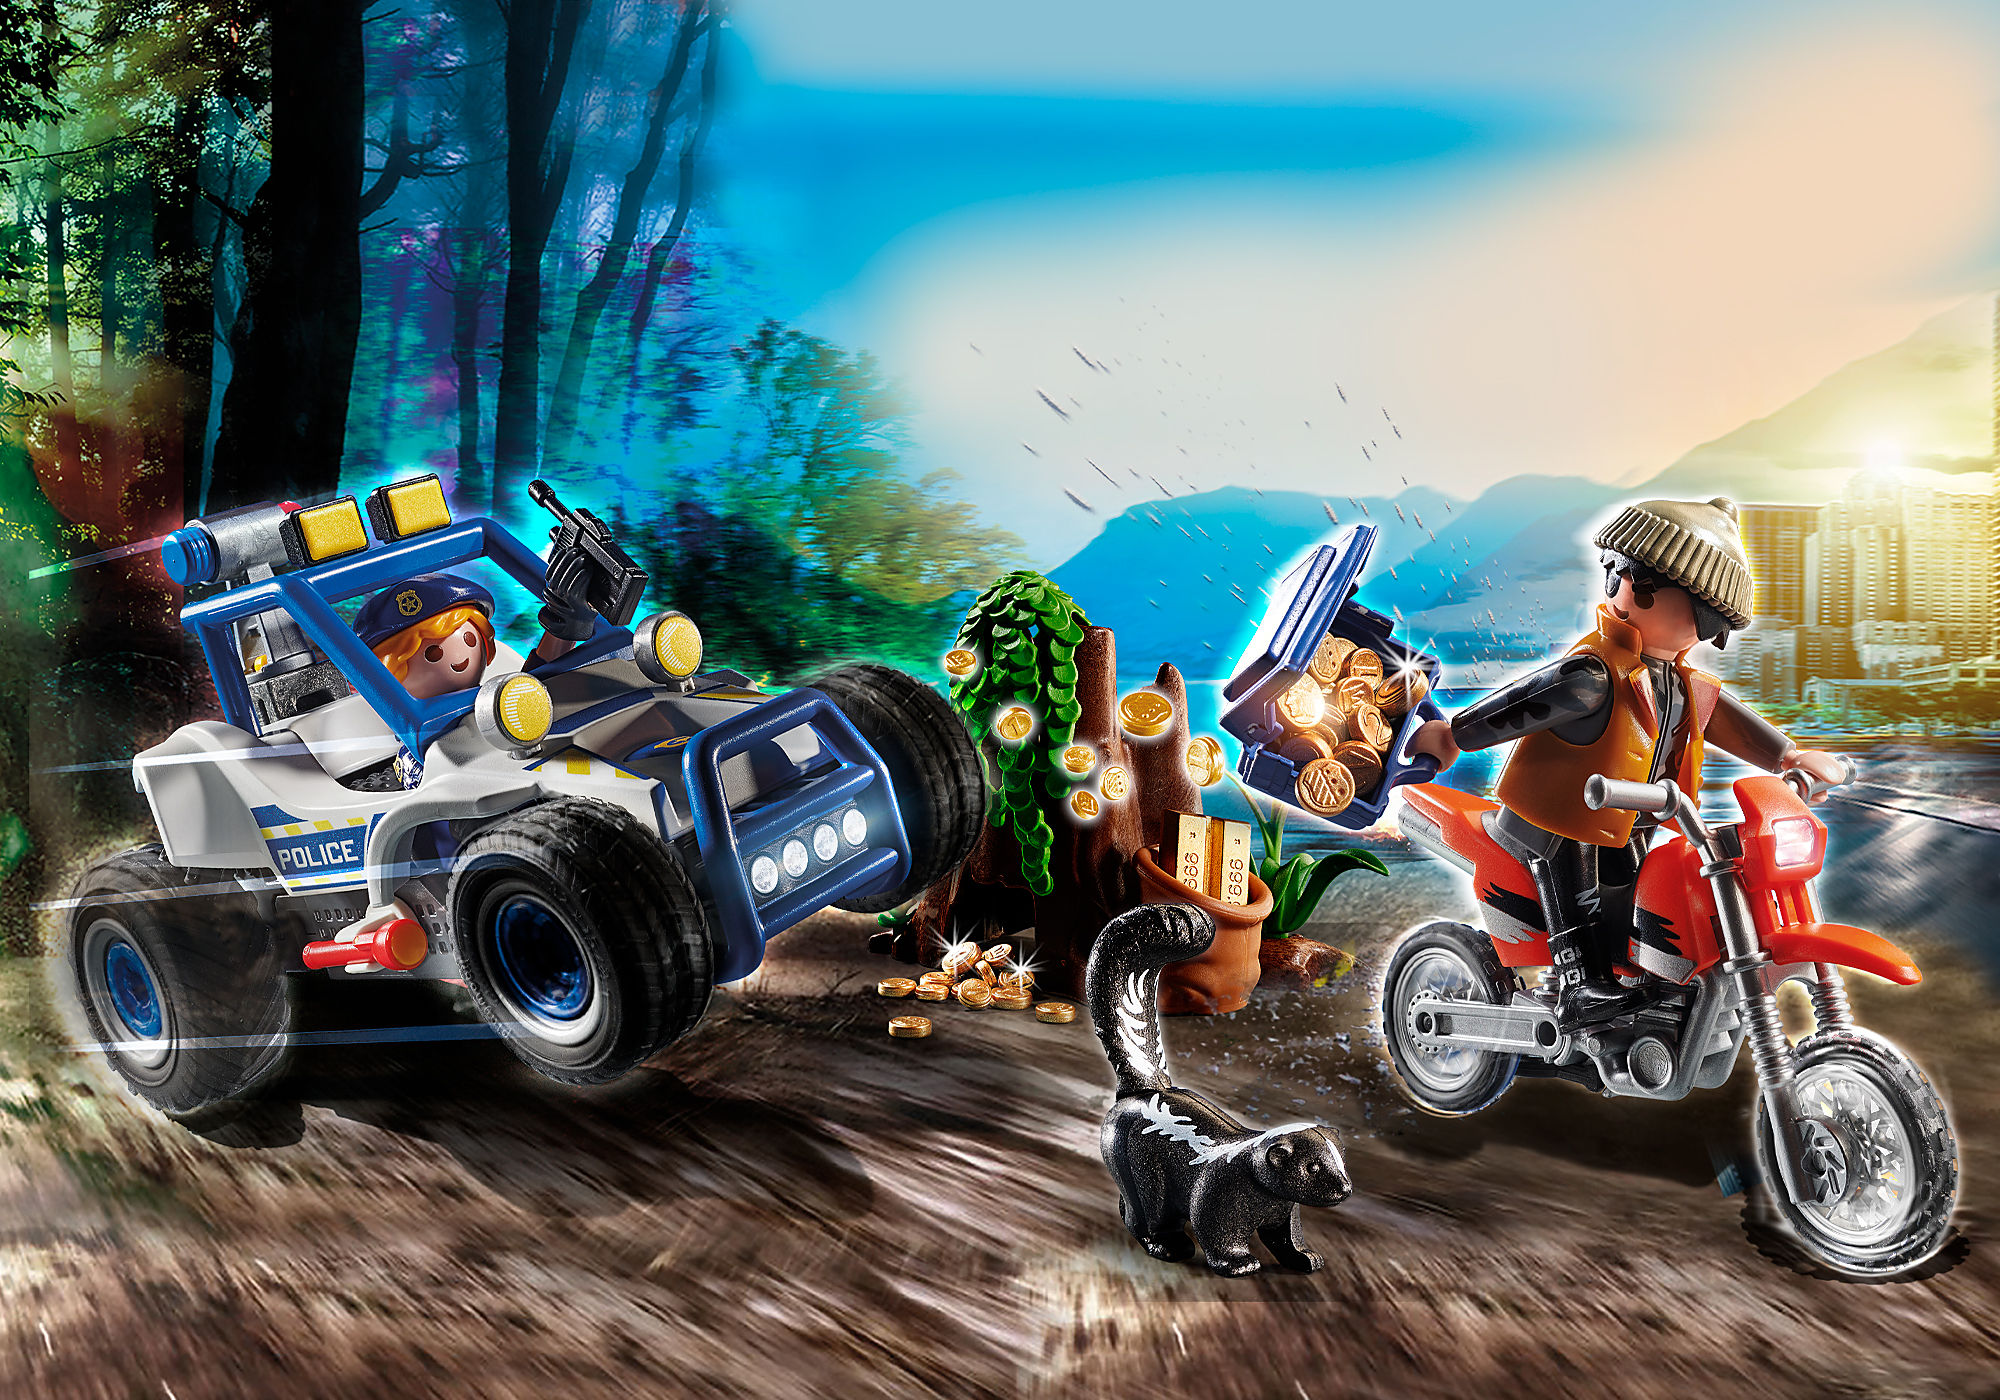 Playmobil City Action SE off-road vehicle - 71144